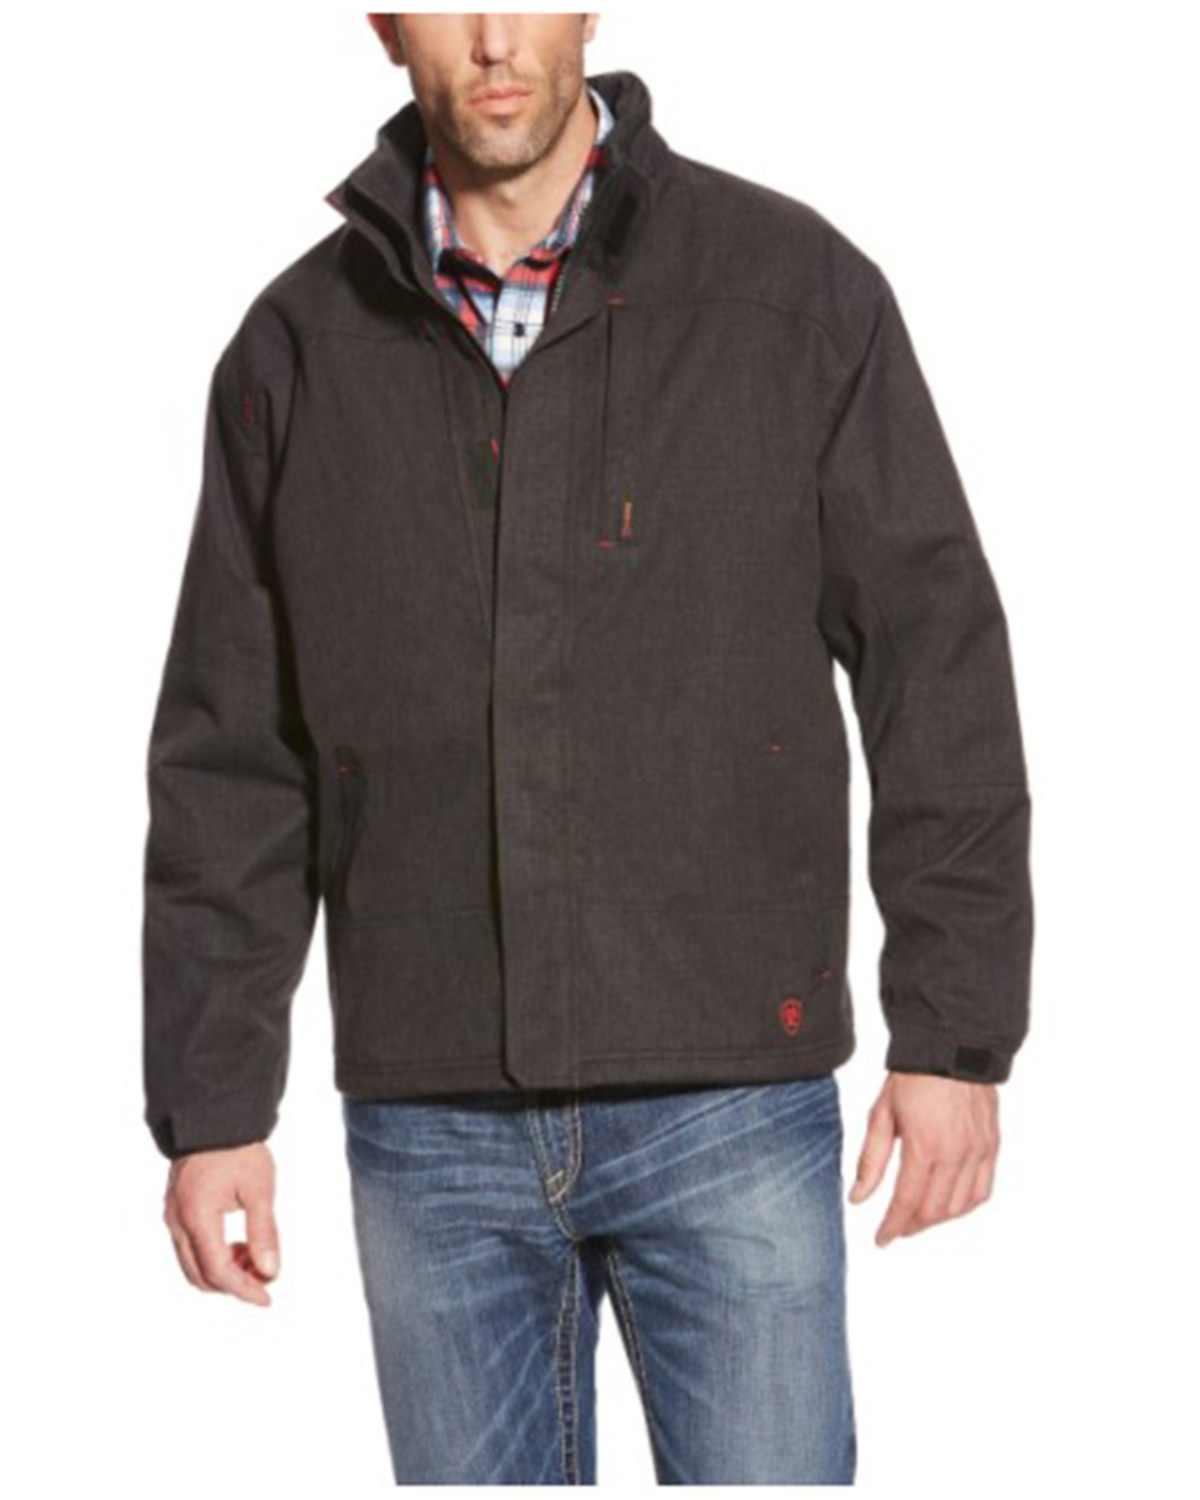 Ariat Men's FR H2O Waterproof Insulated Jacket